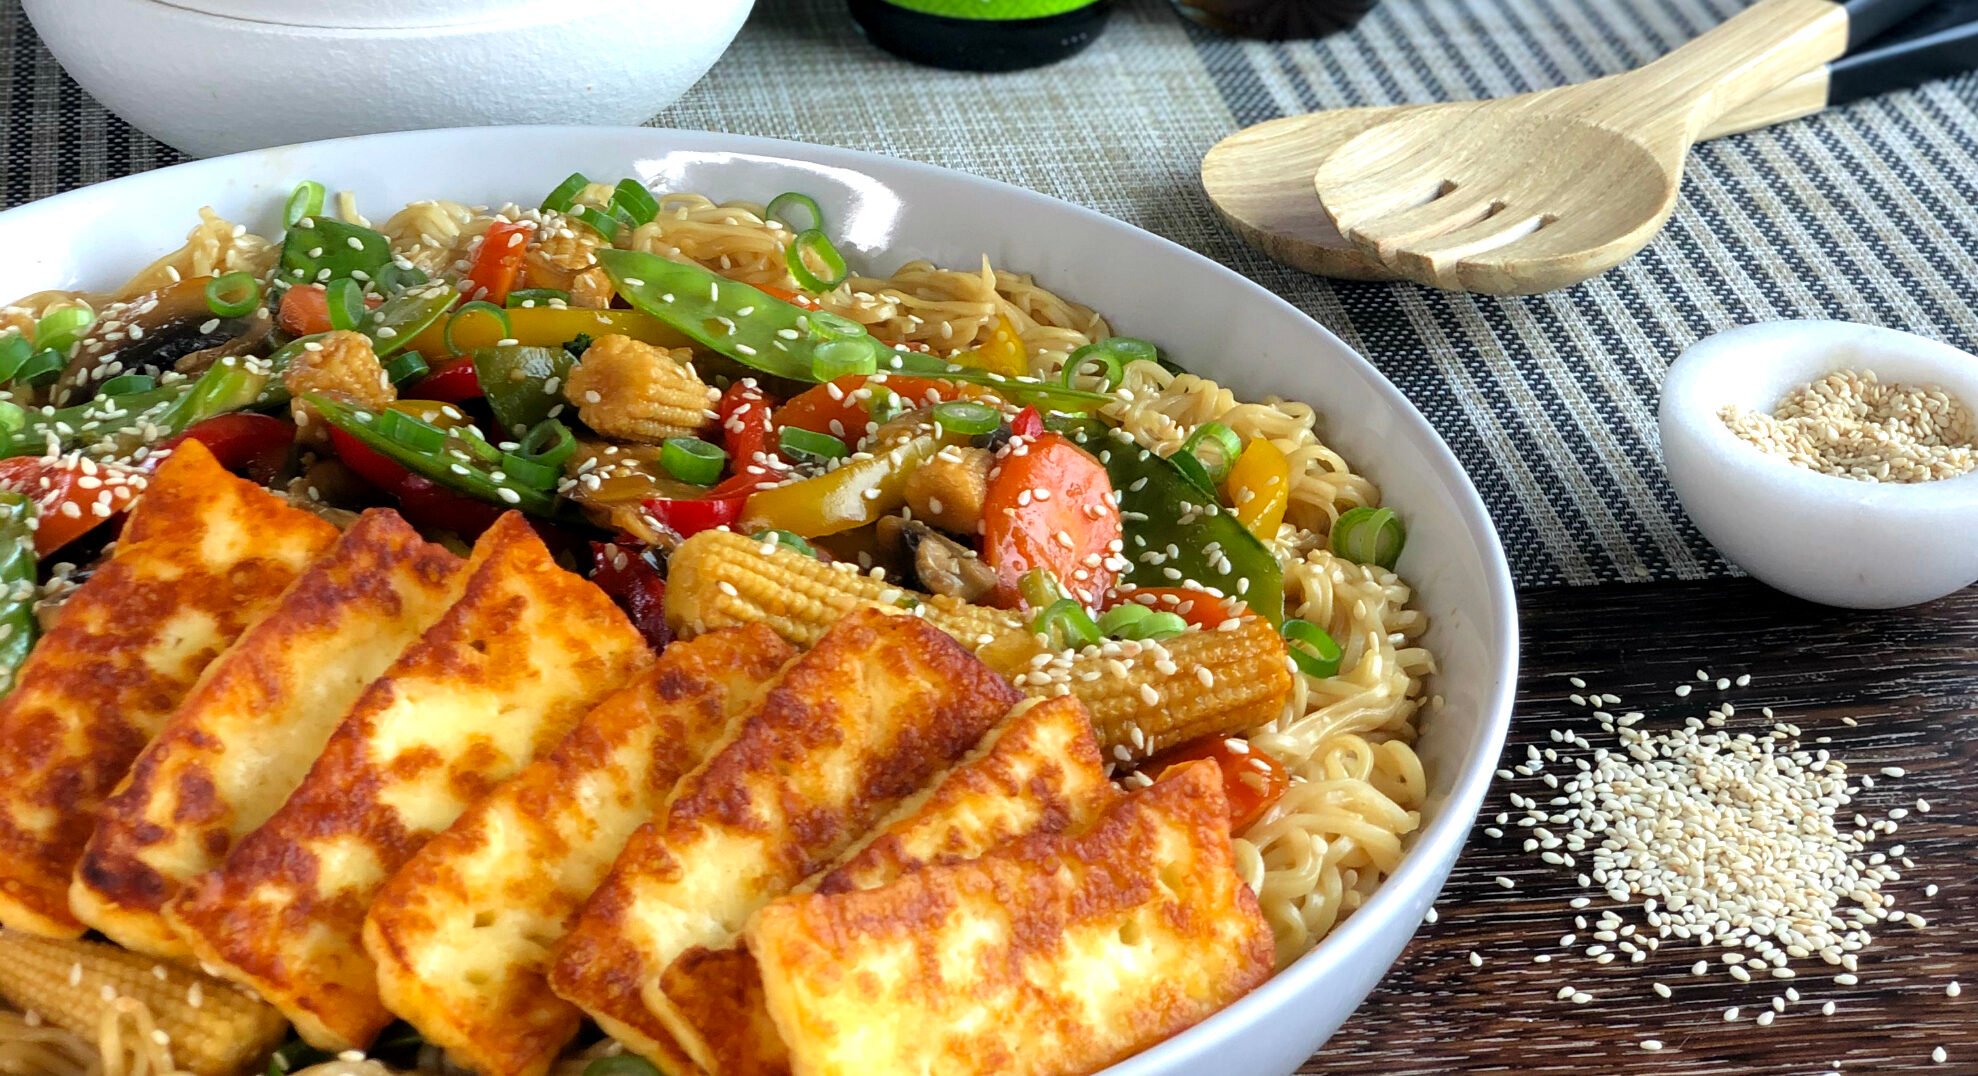 Bowl of Stir fried vegetables with pan friend halloumi 